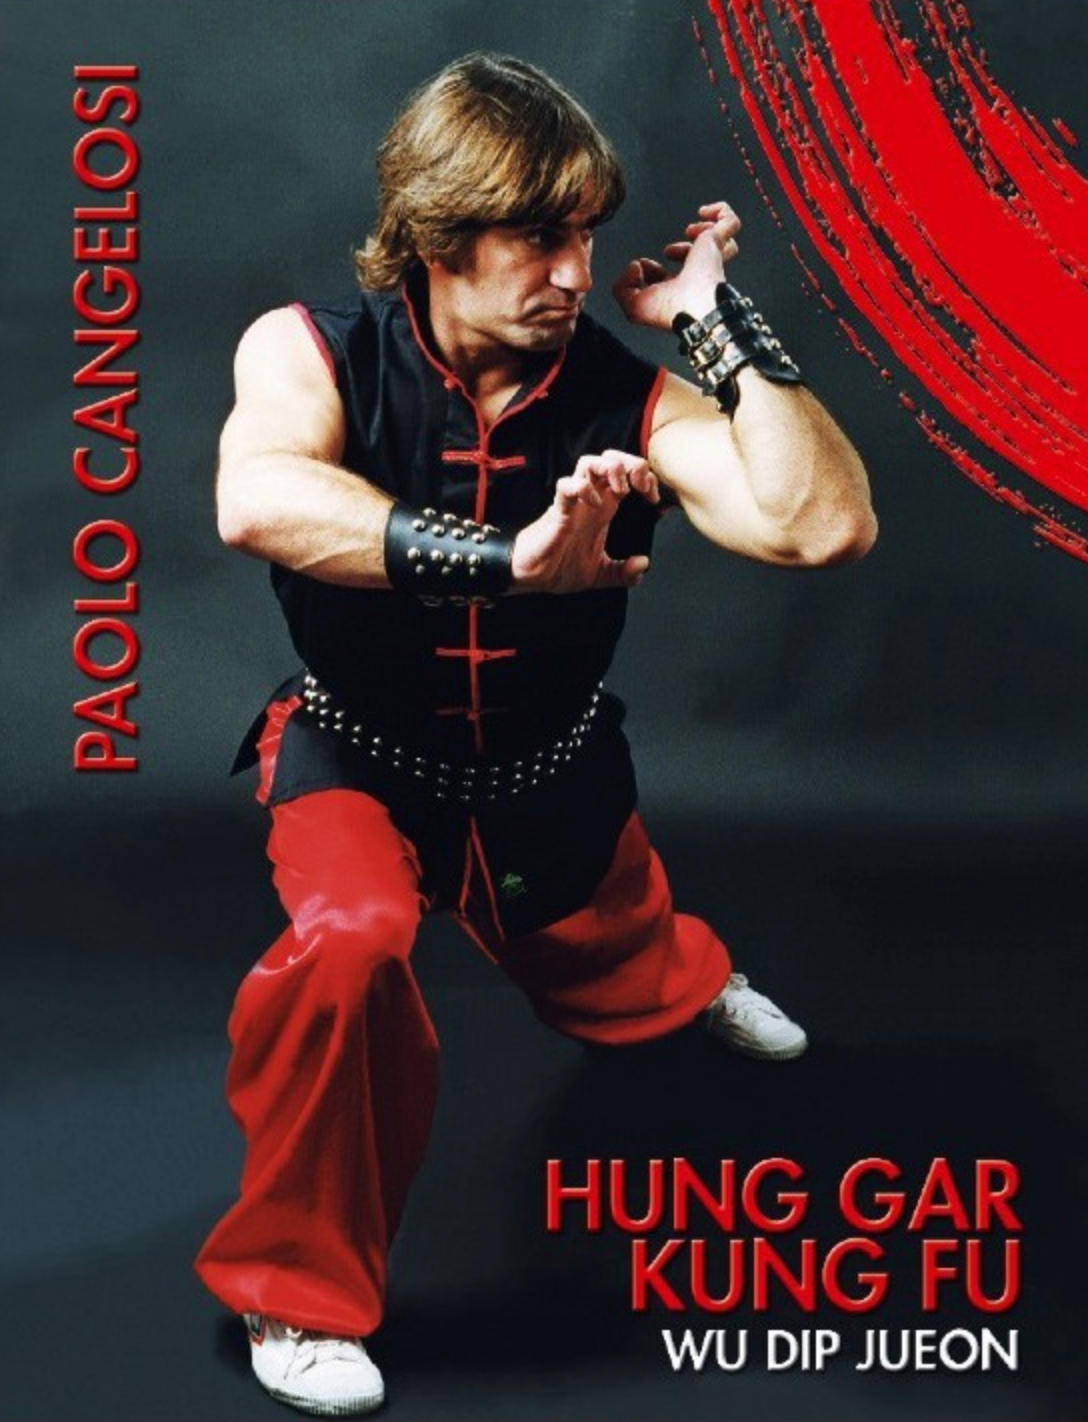 Hung Gar Kung Fu DVD with Paolo Cangelosi - Budovideos Inc